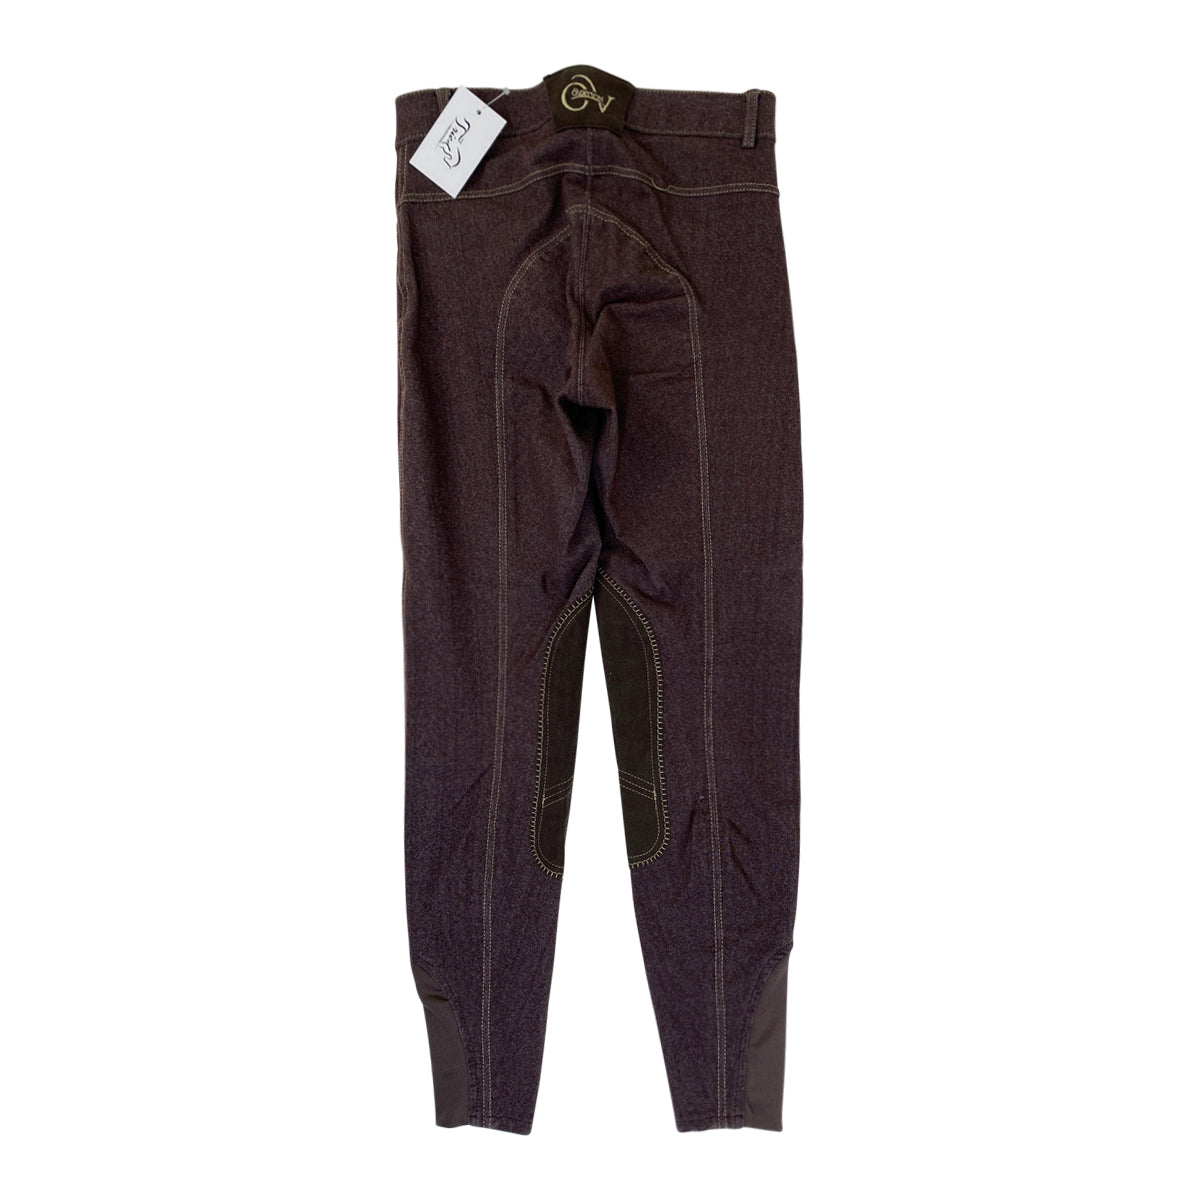 Ovation 'SoftFlex' Knee Patch Breeches in Brown